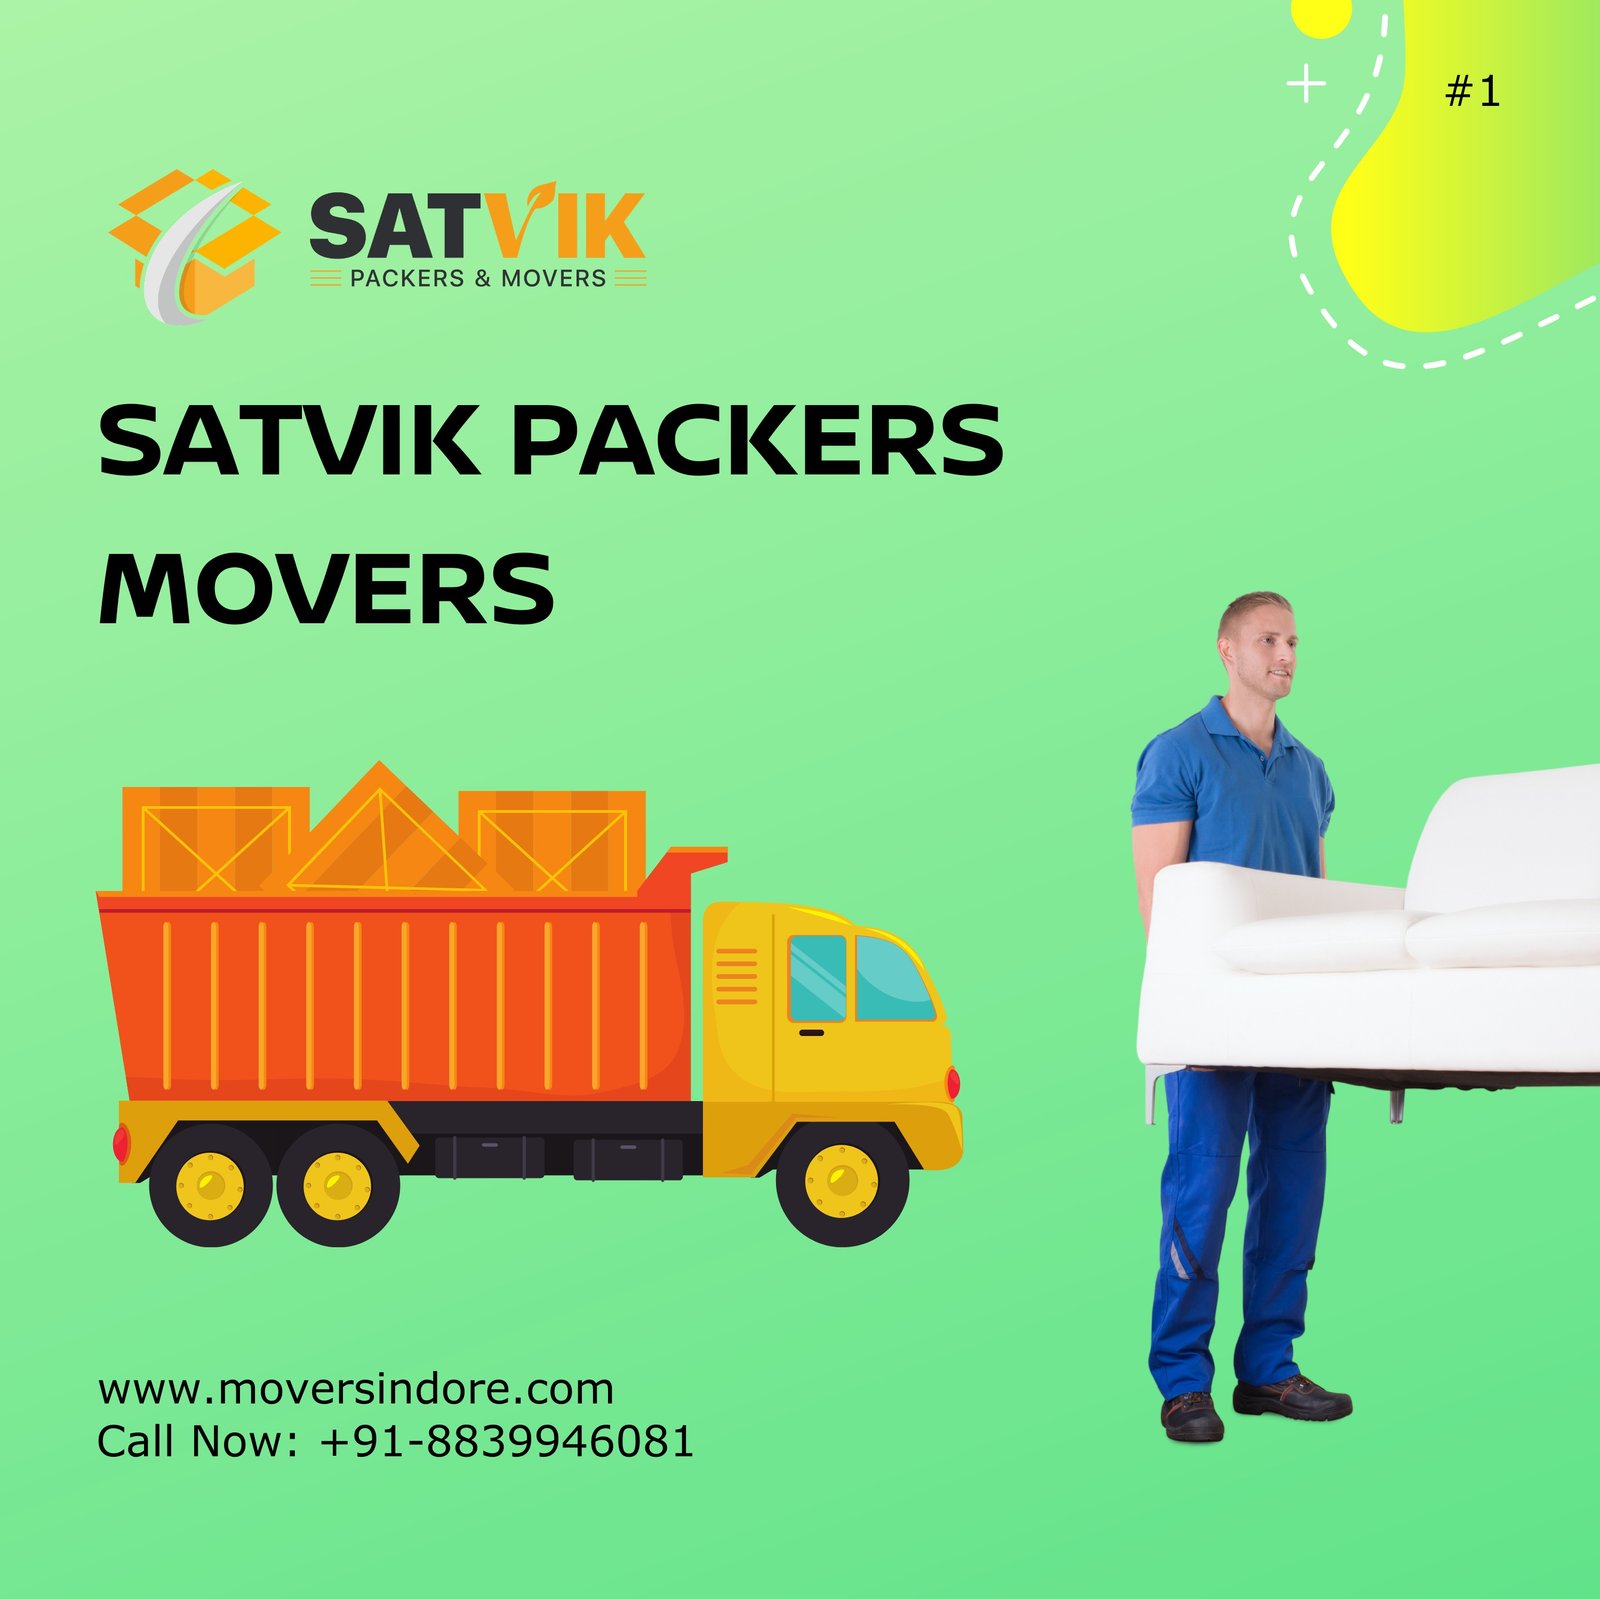 India’s no 1 packers and movers | satvik packers and movers